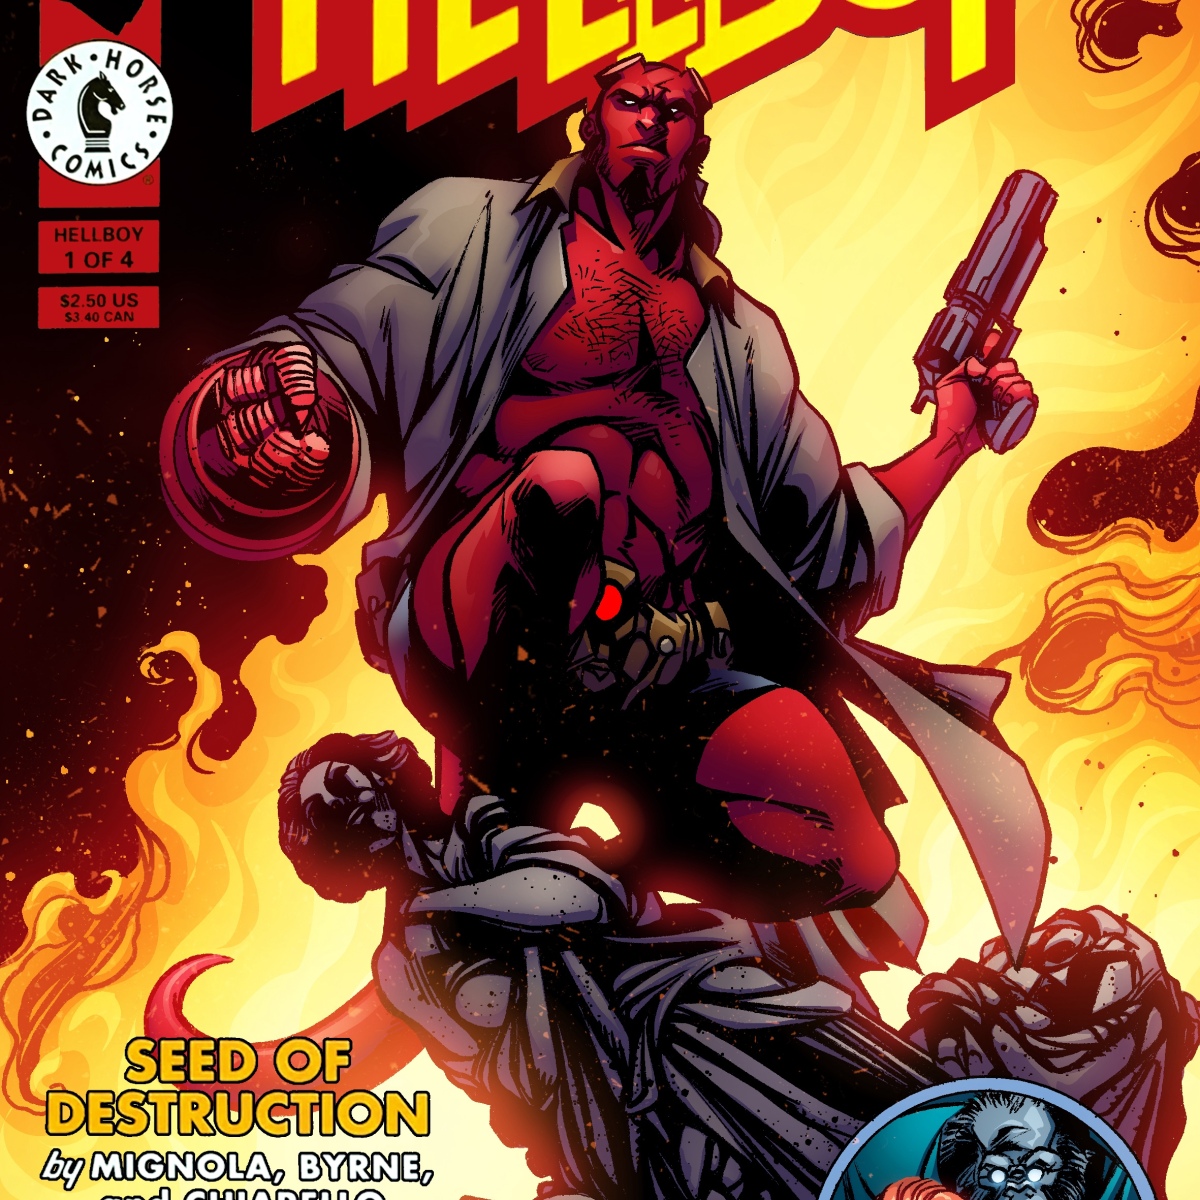 Hellboy anniversary – Comic cover remake